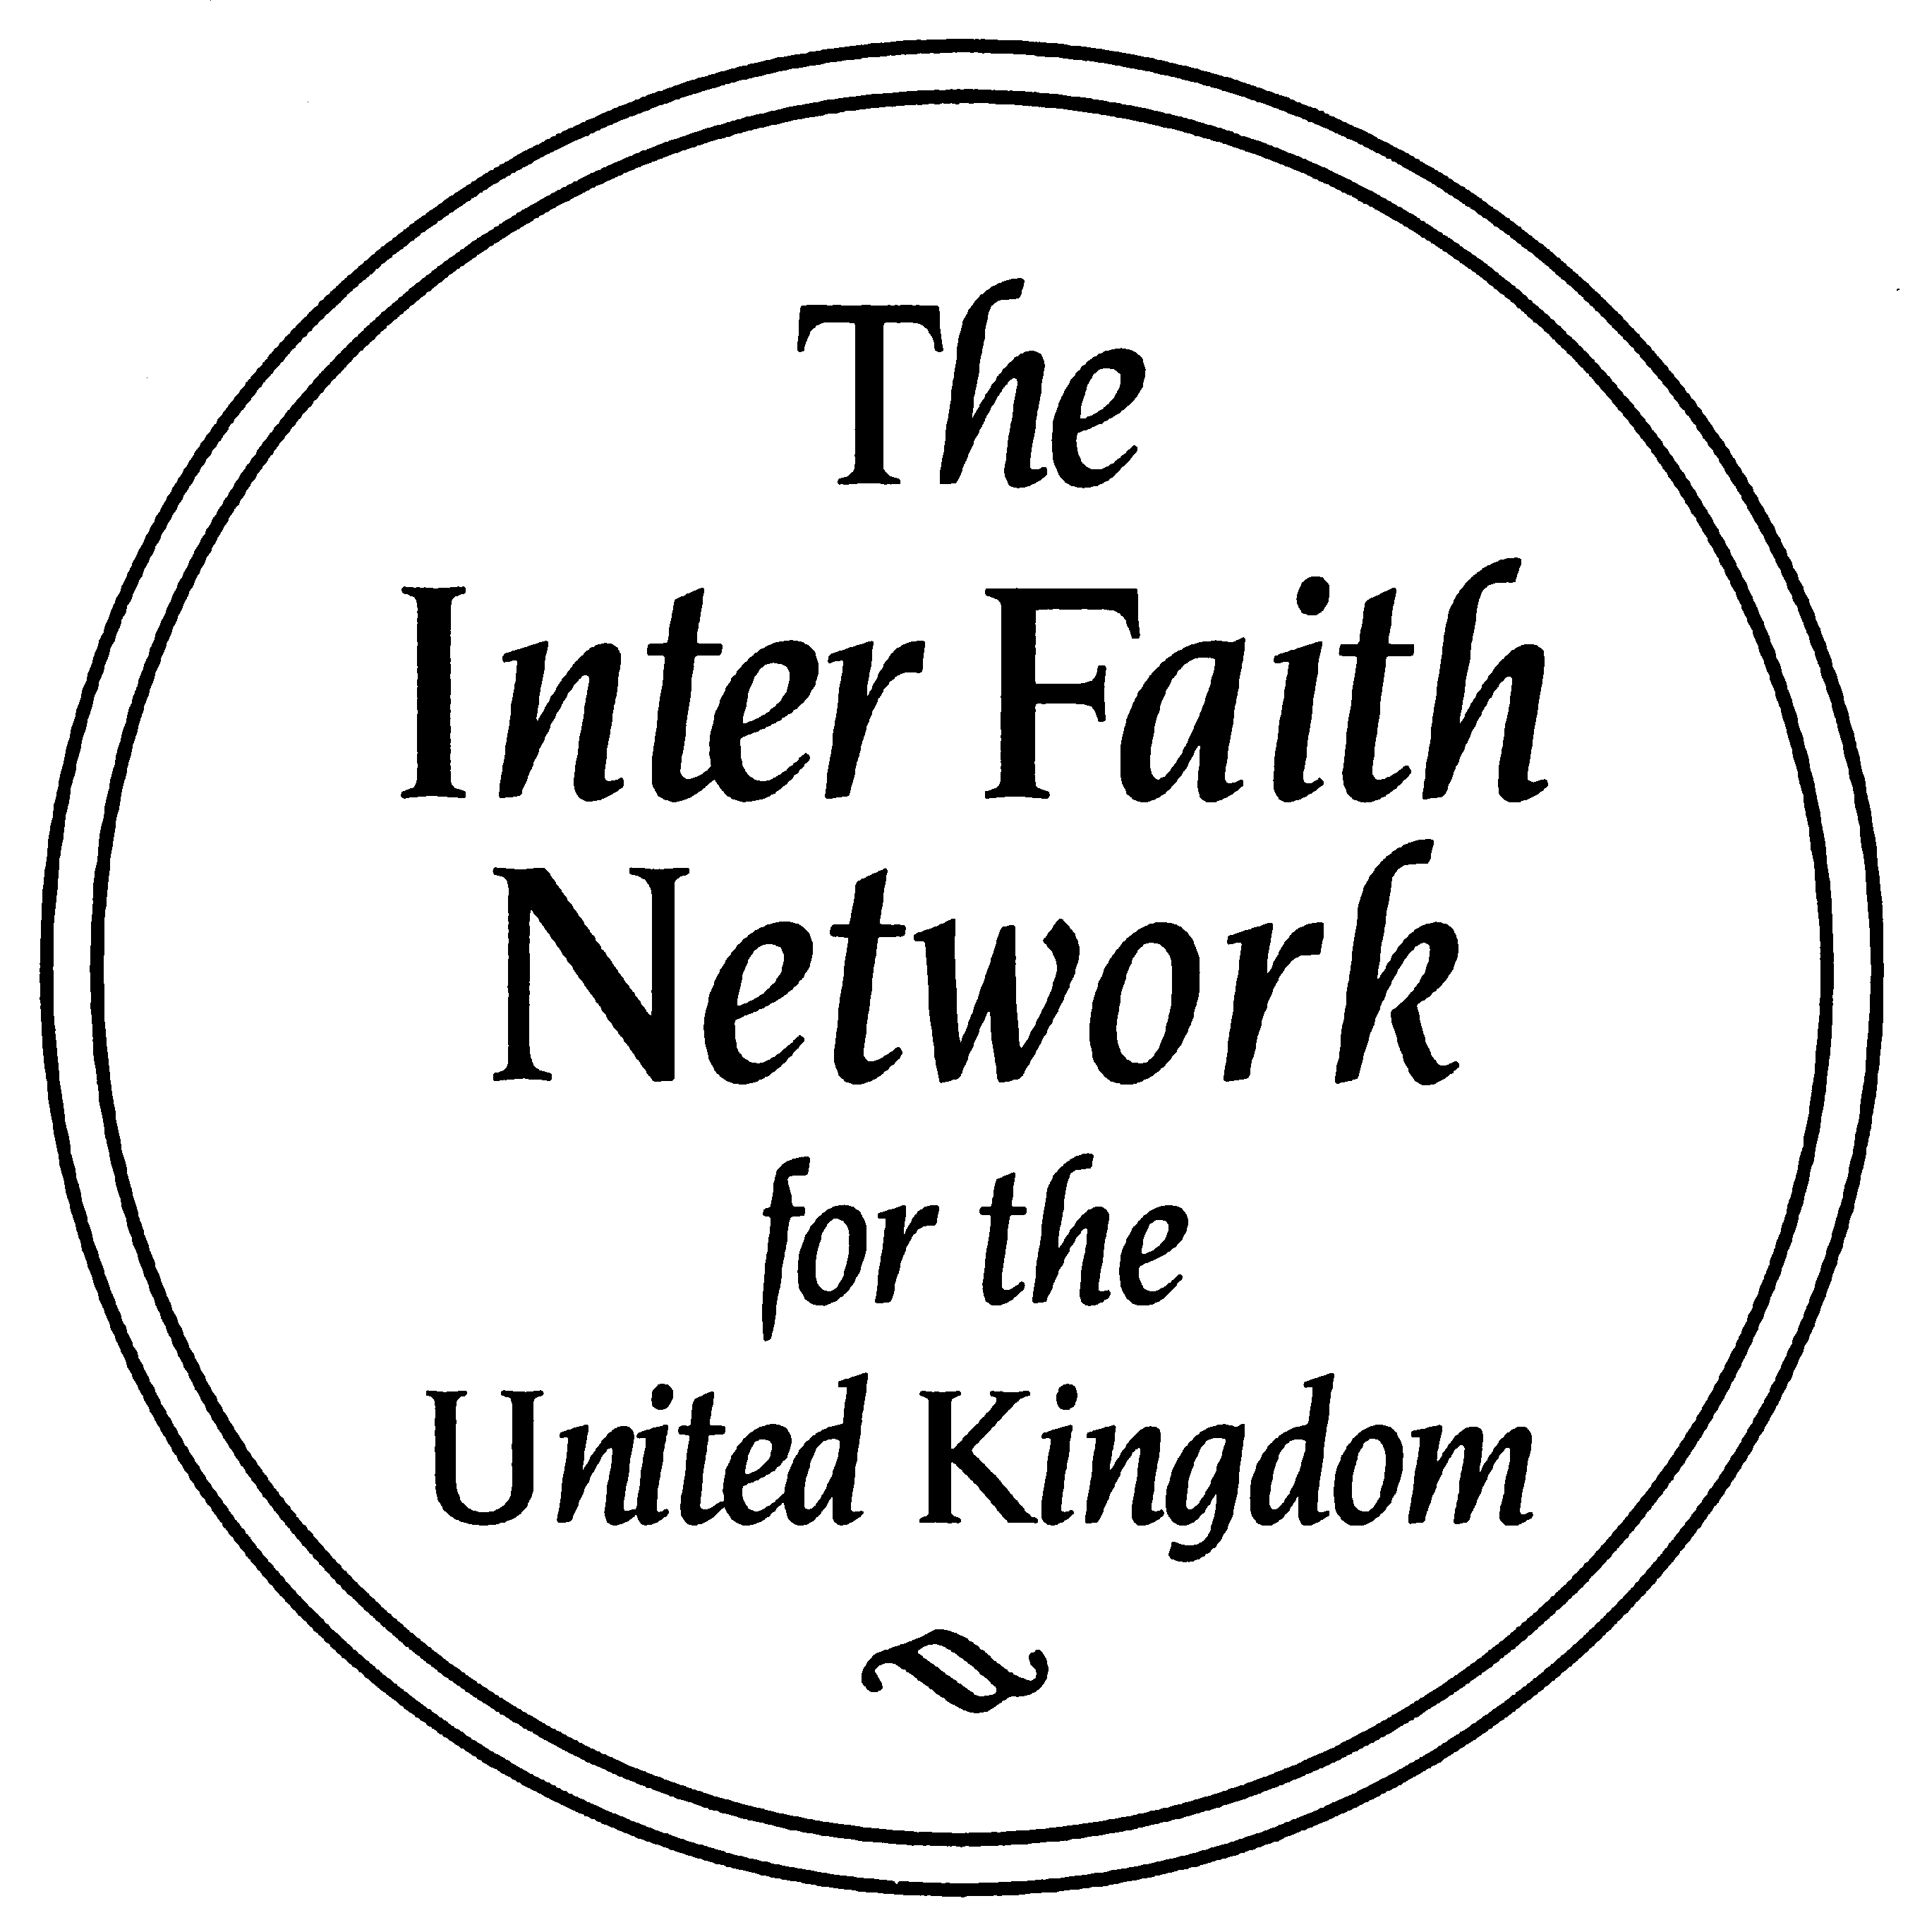 LOCAL INTER FAITH ORGANISATIONS APPLICATION FOR MEMBERSHIP THE INTER